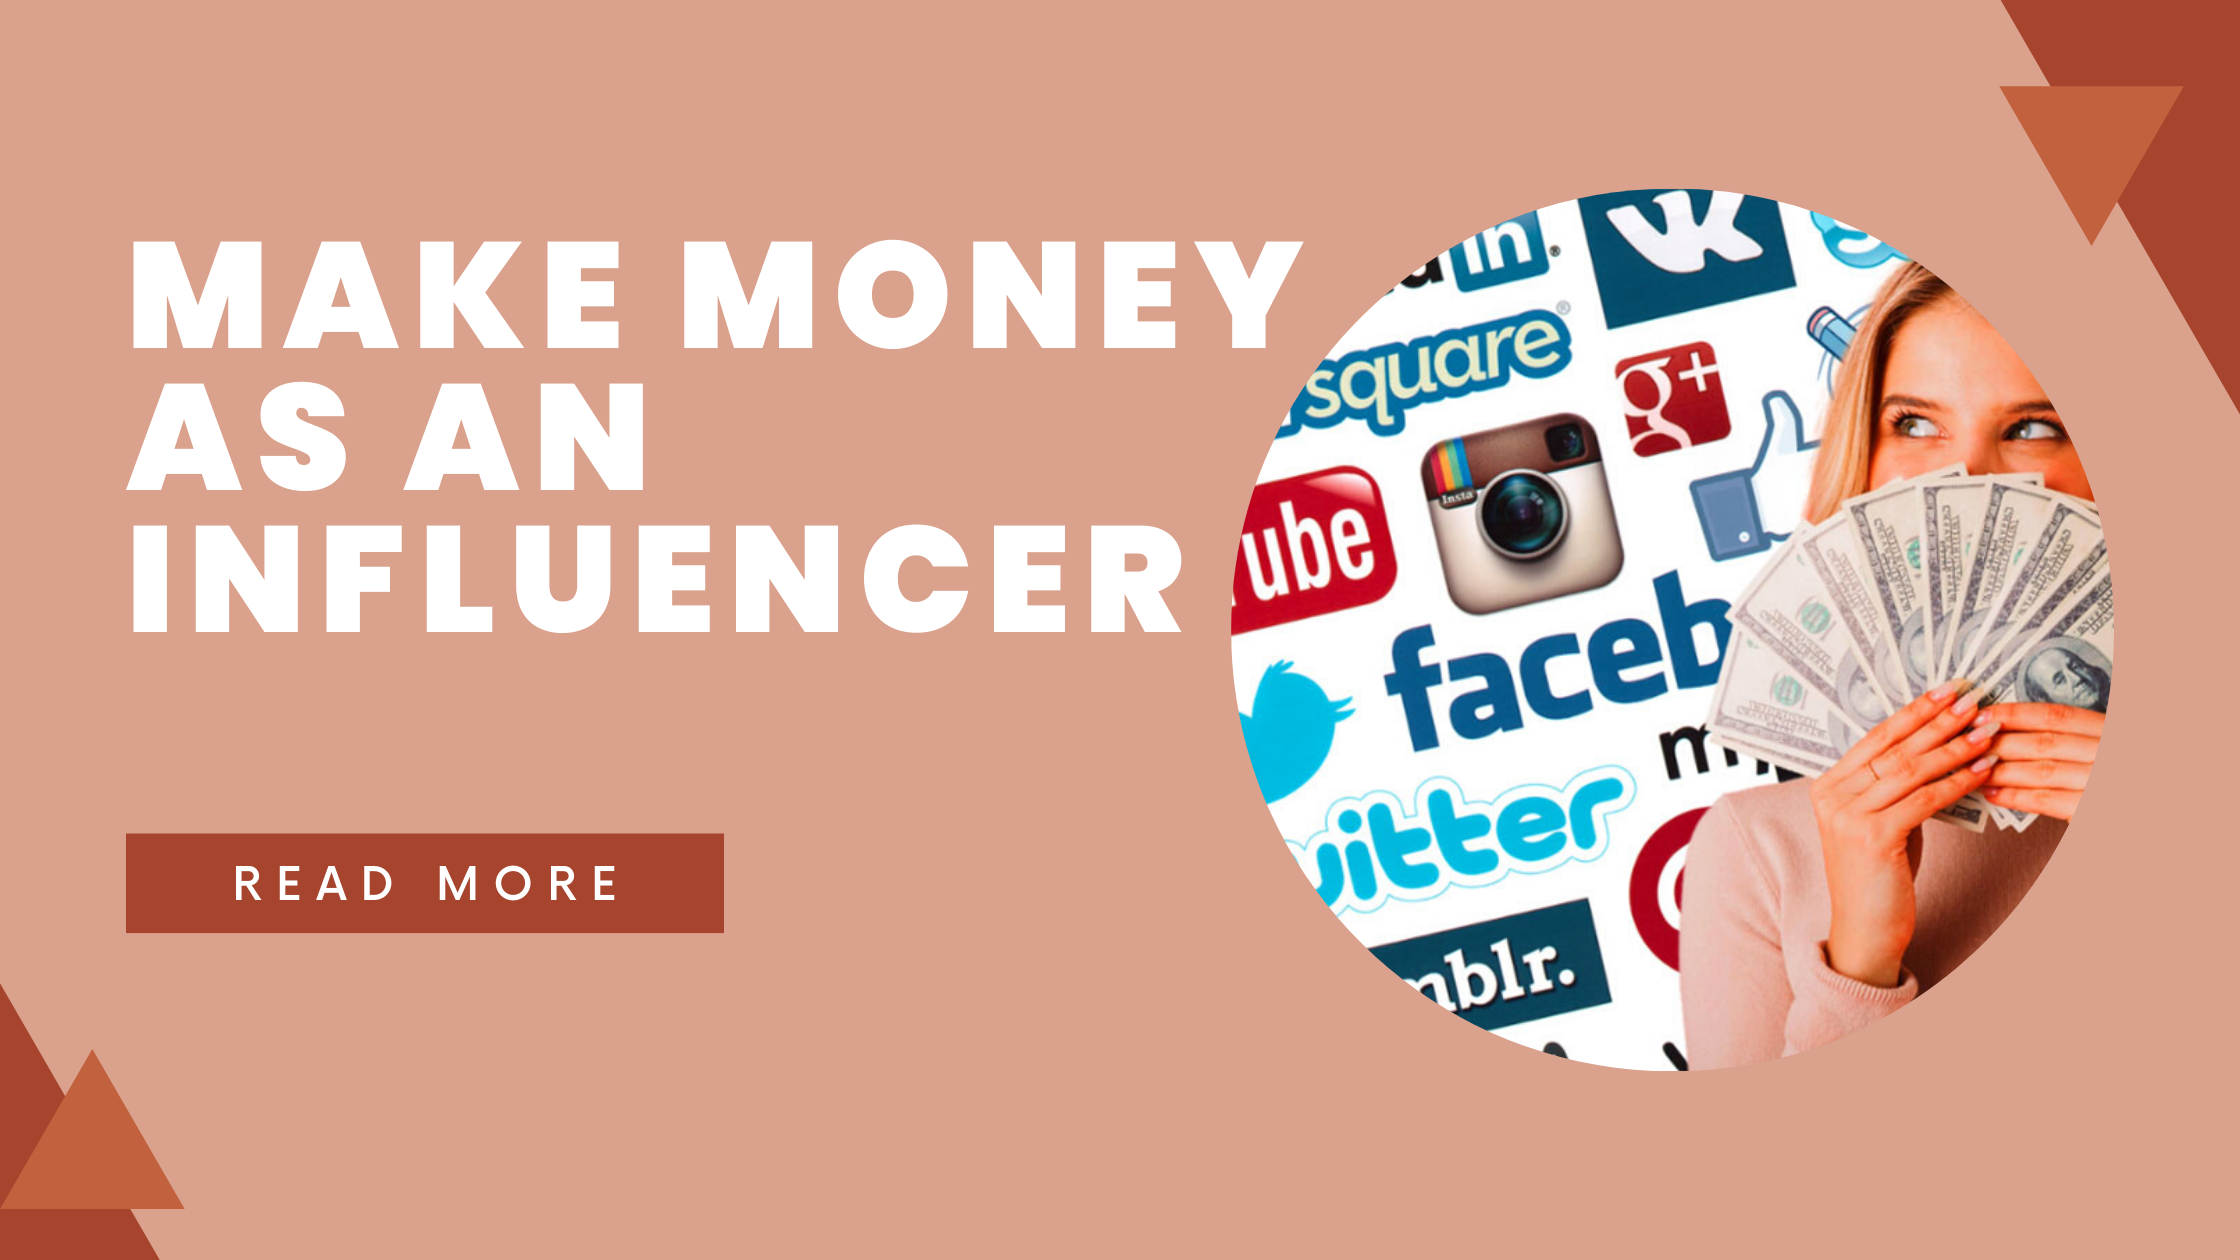 Monetize your influecne: 4 ways to monetize your social media and boost your income